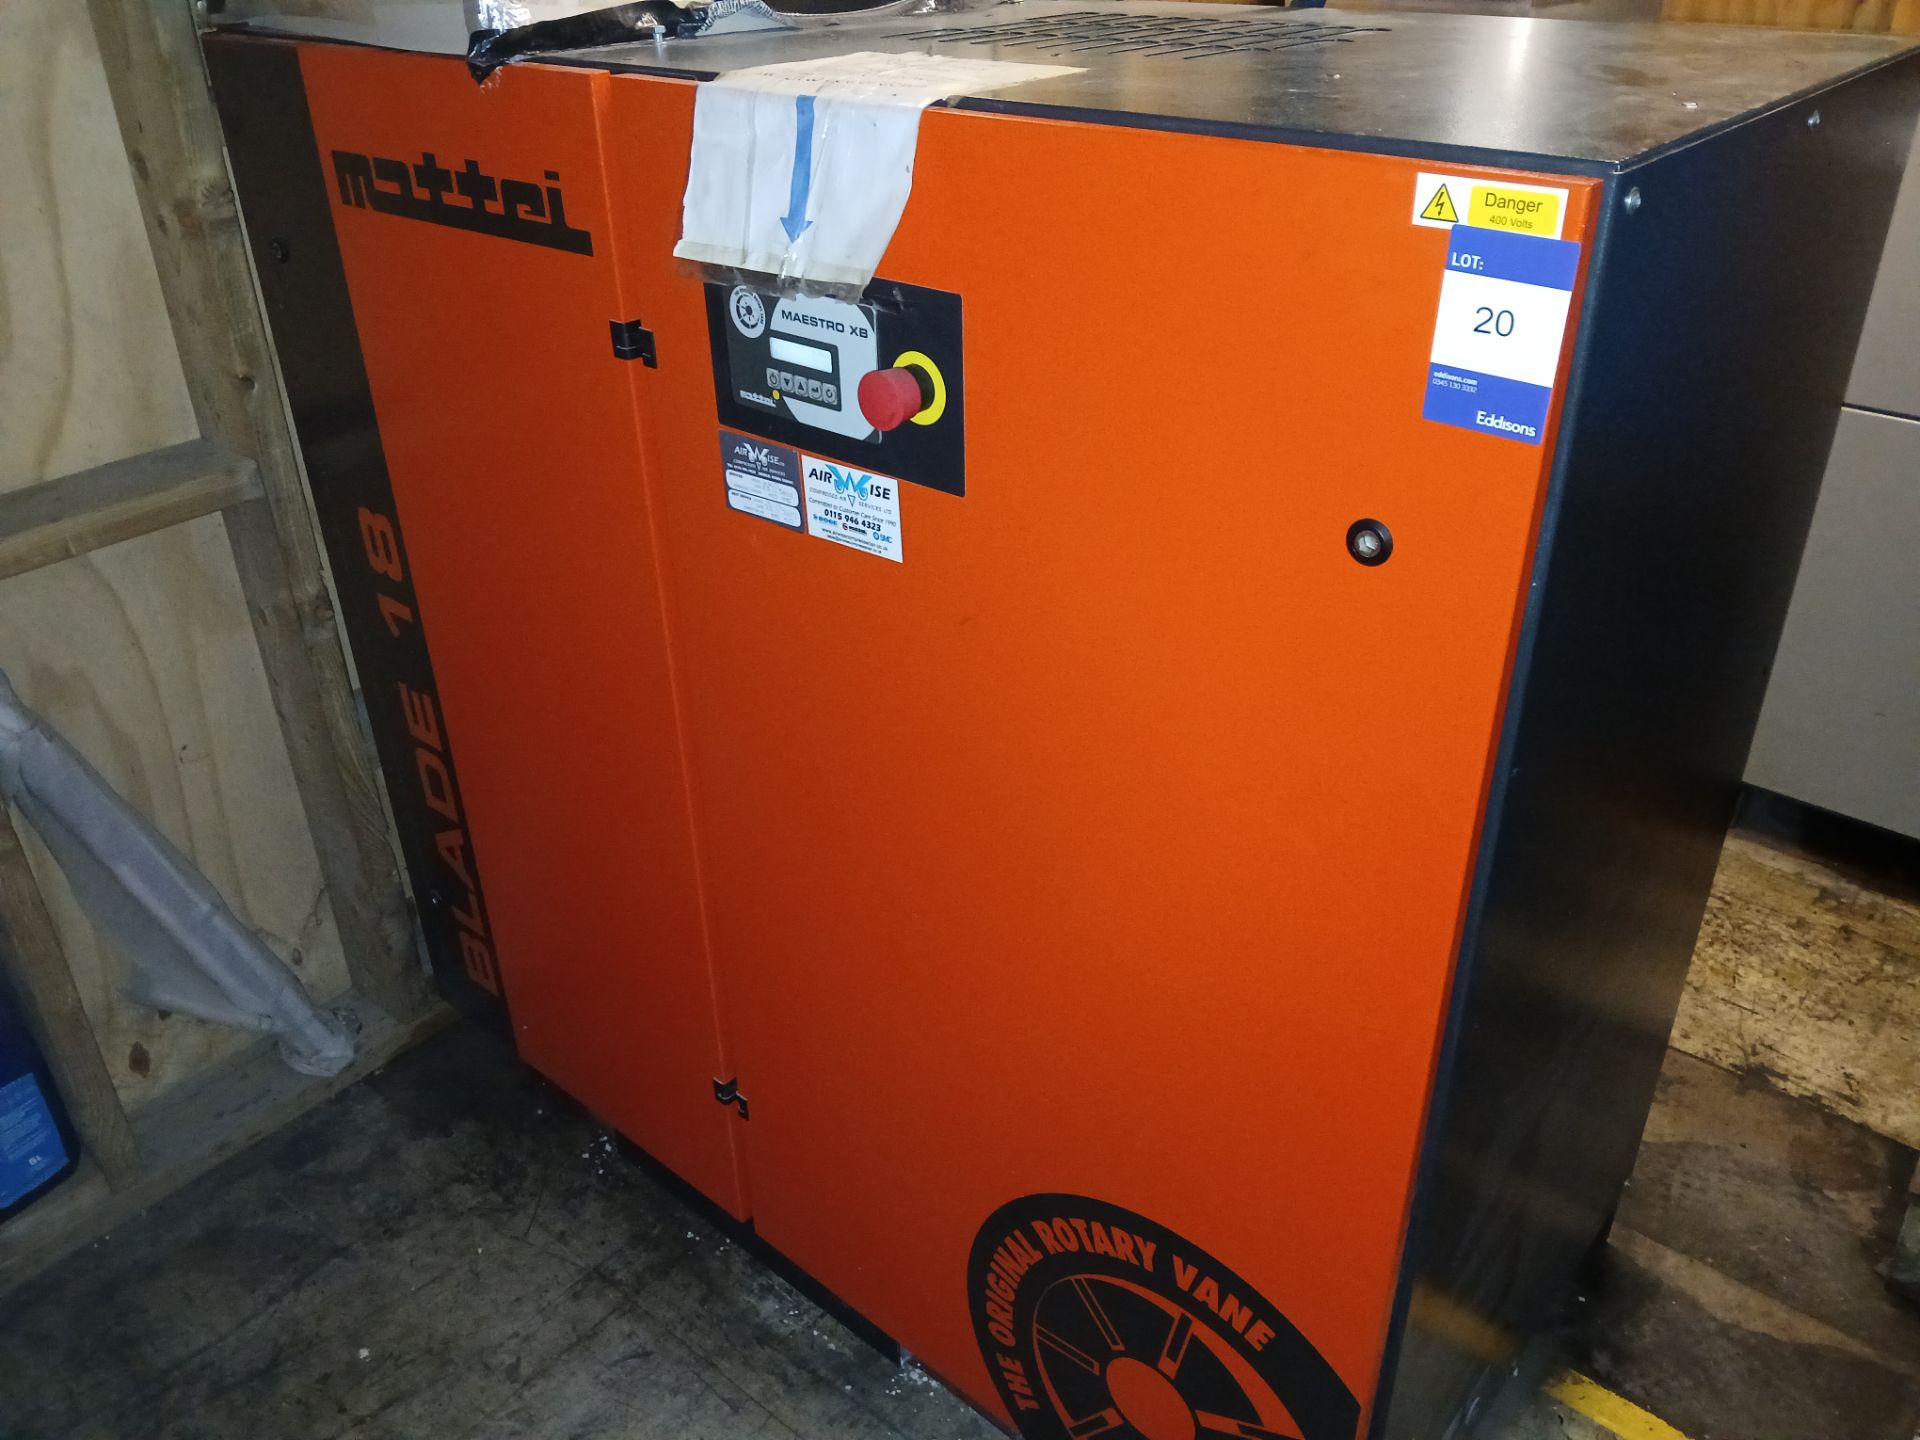 Mattei Blade 18L packaged air compressor, Serial Number 1000506, Year 2018, c.8866hours (Running)